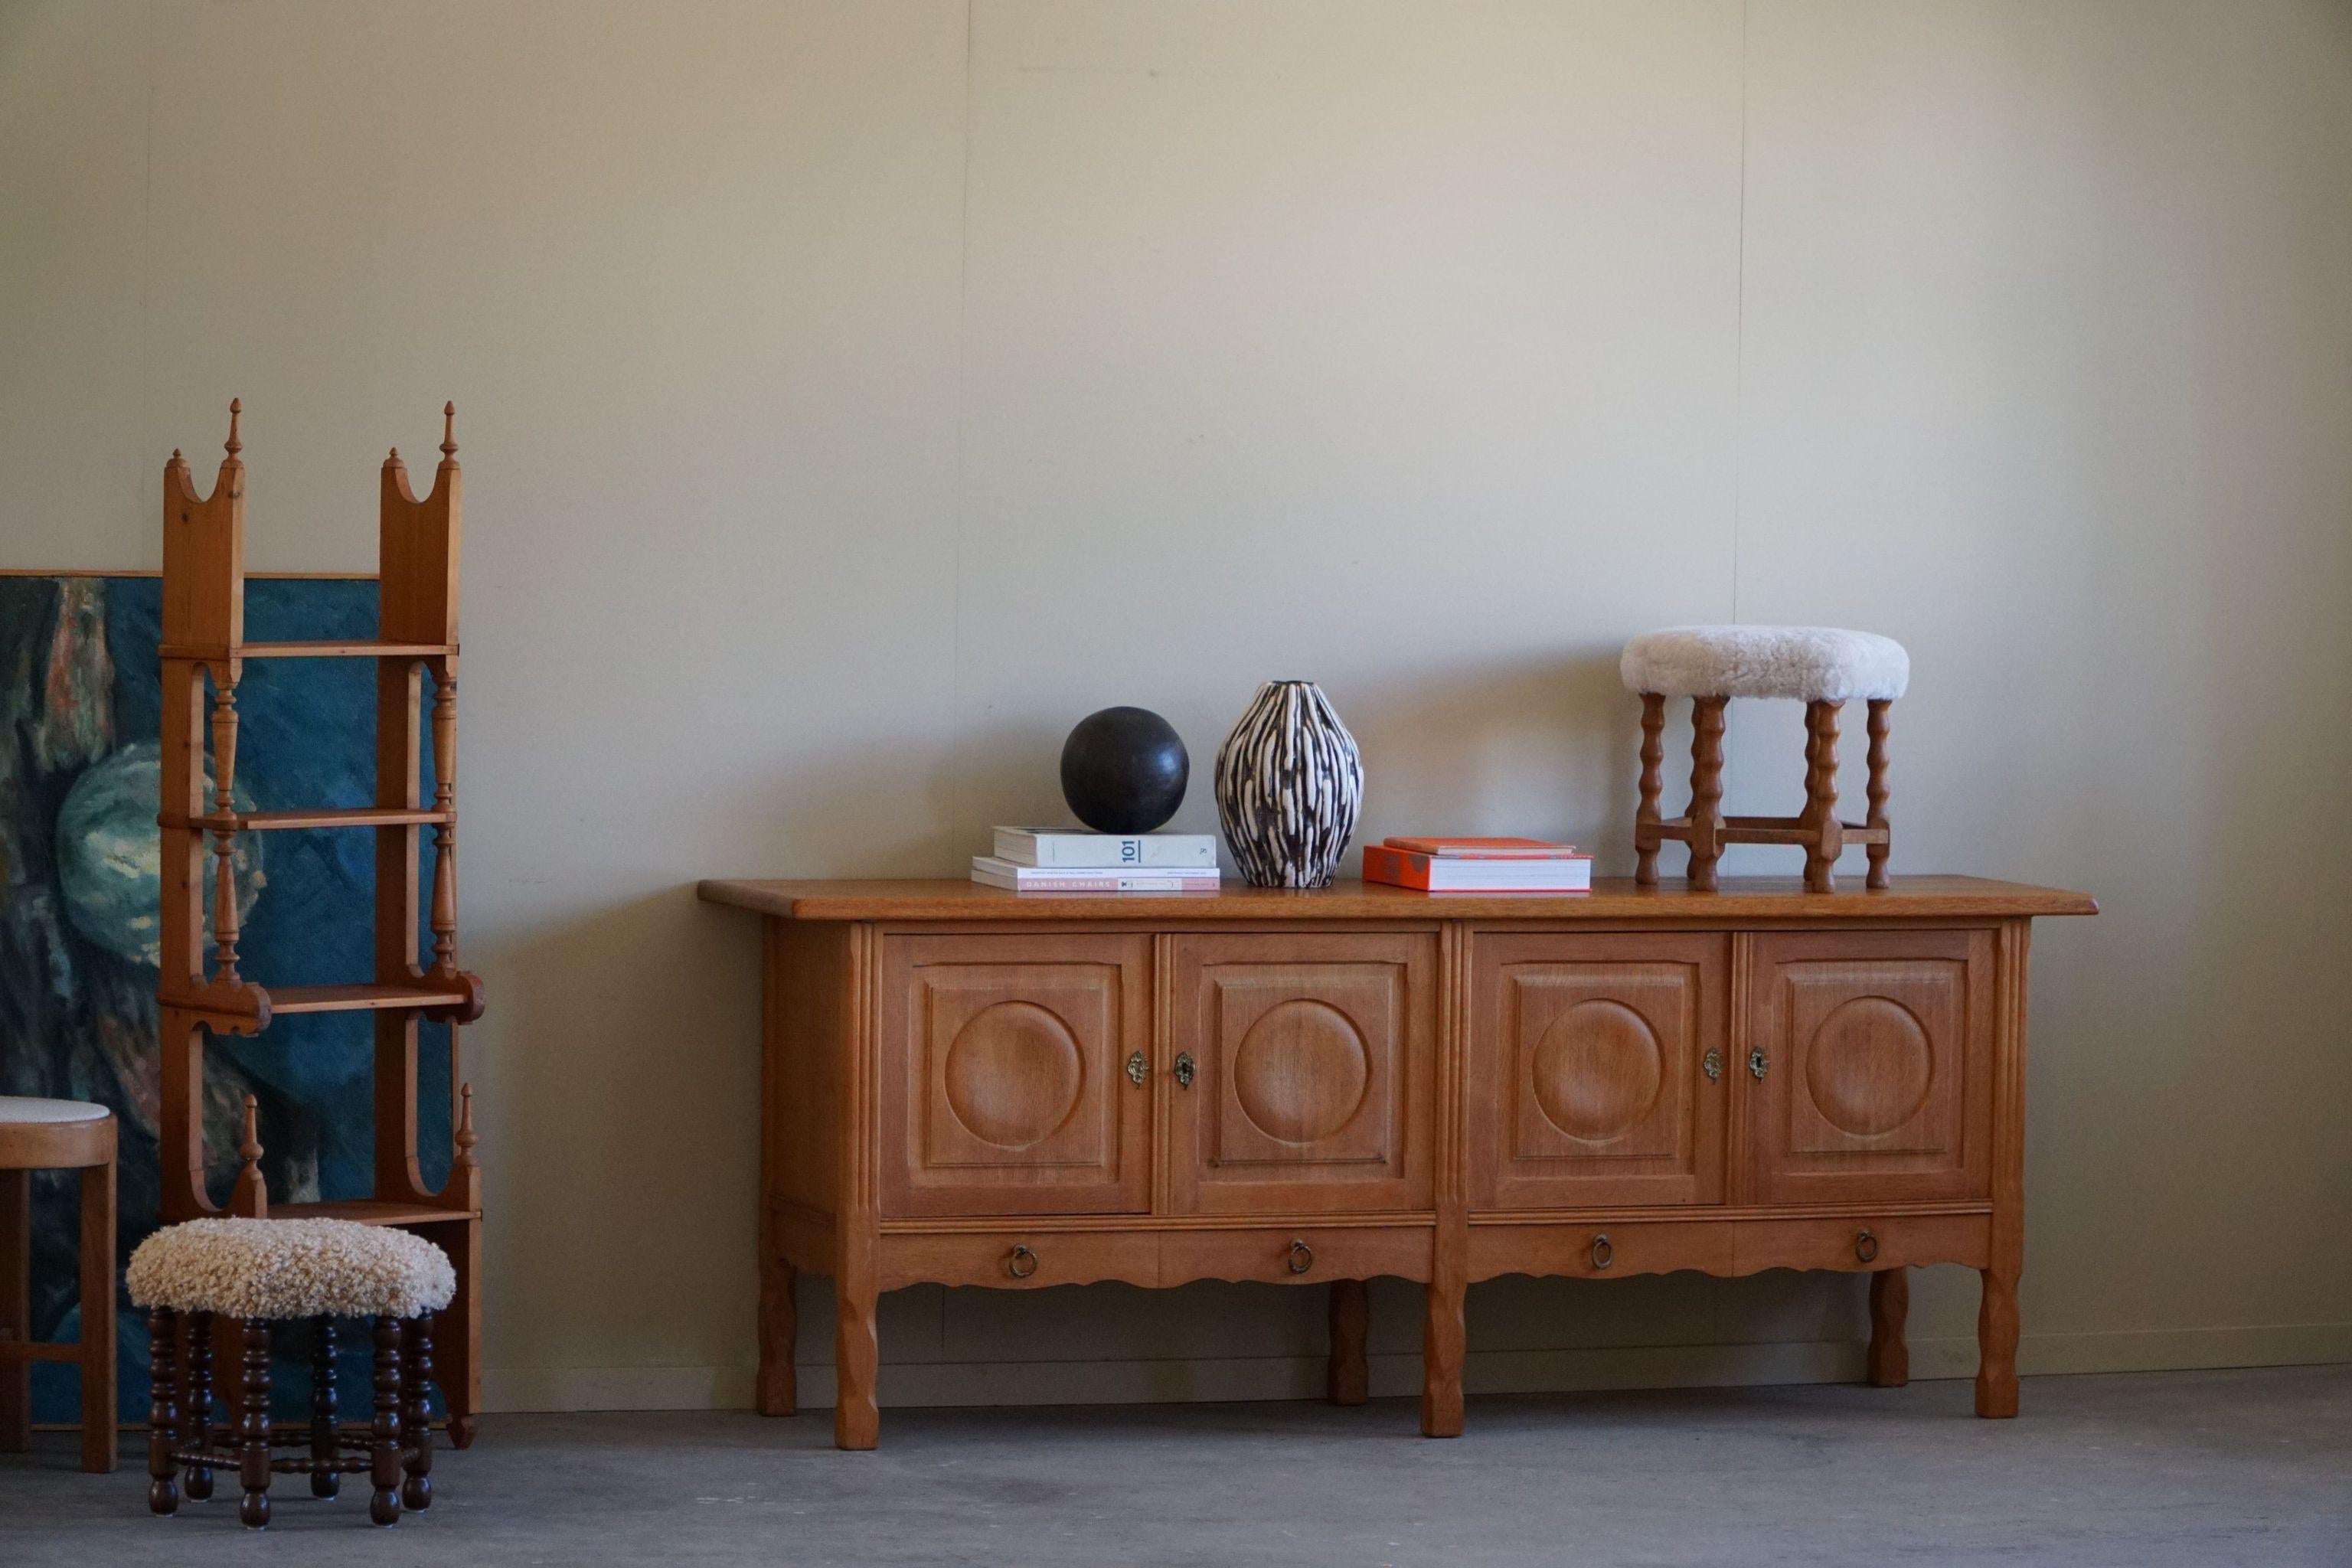 A fantastic low classic sideboard in solid oak. Made by a Danish Cabinetmaker, Anker Sørensen in the 1960s. This piece is in a good vintage condition, with few traces of wear.

This brutalist object will fit into many interior styles. A Modern,